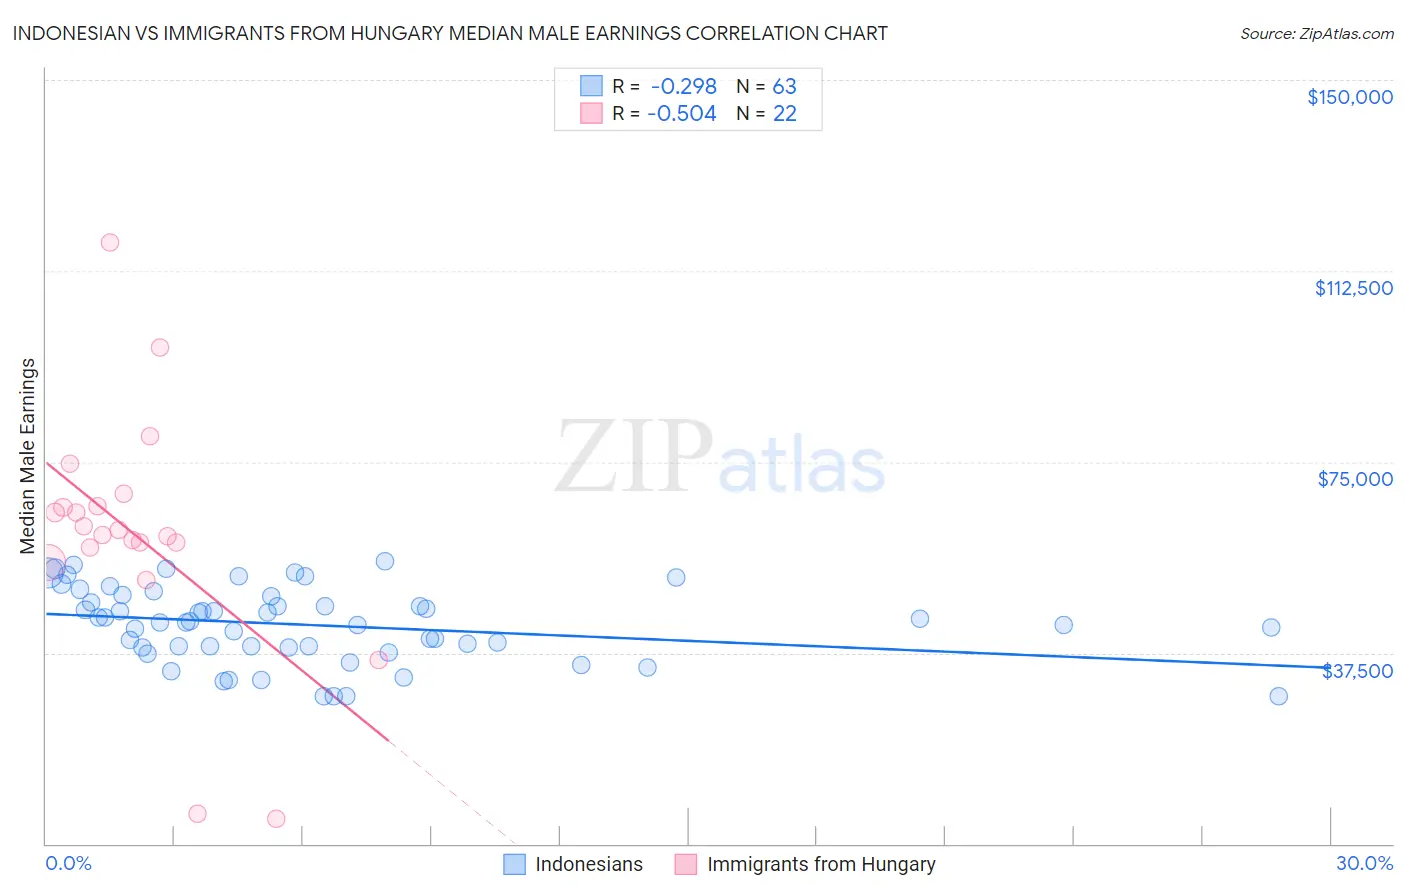 Indonesian vs Immigrants from Hungary Median Male Earnings